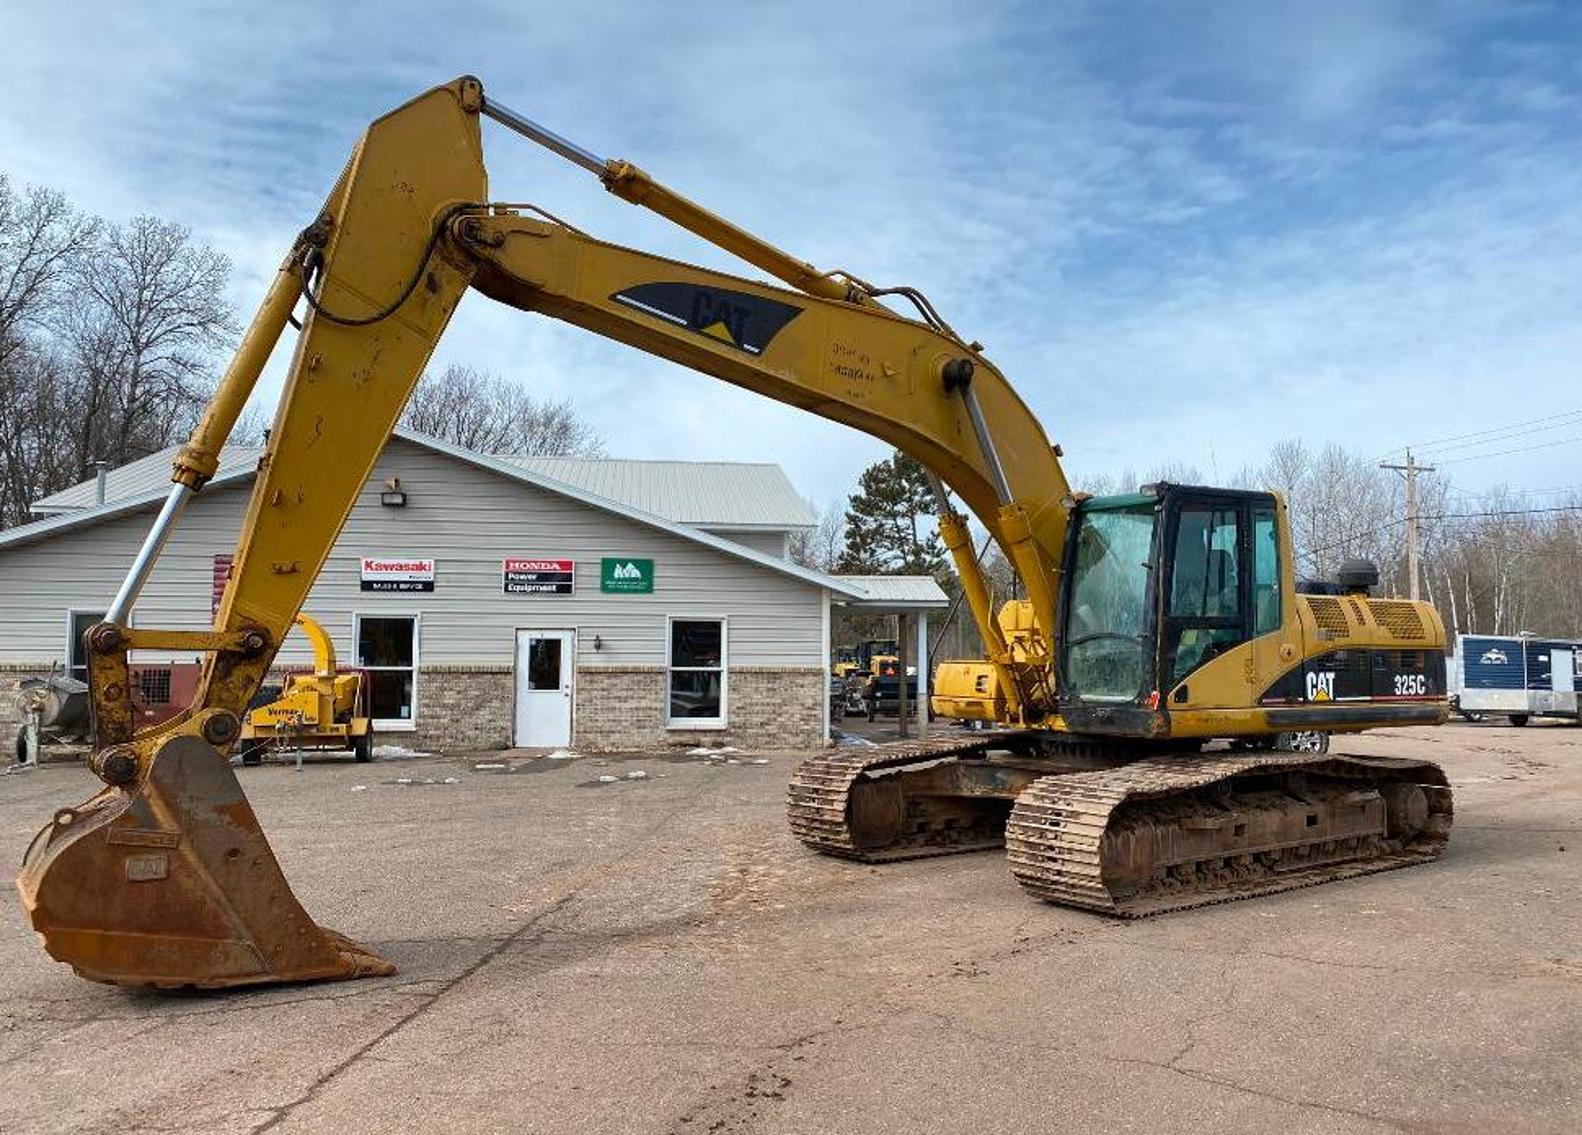 Rental Shop Discontinuing Business, Surplus Excavating Equipment, Fish House, and Horse Equipment